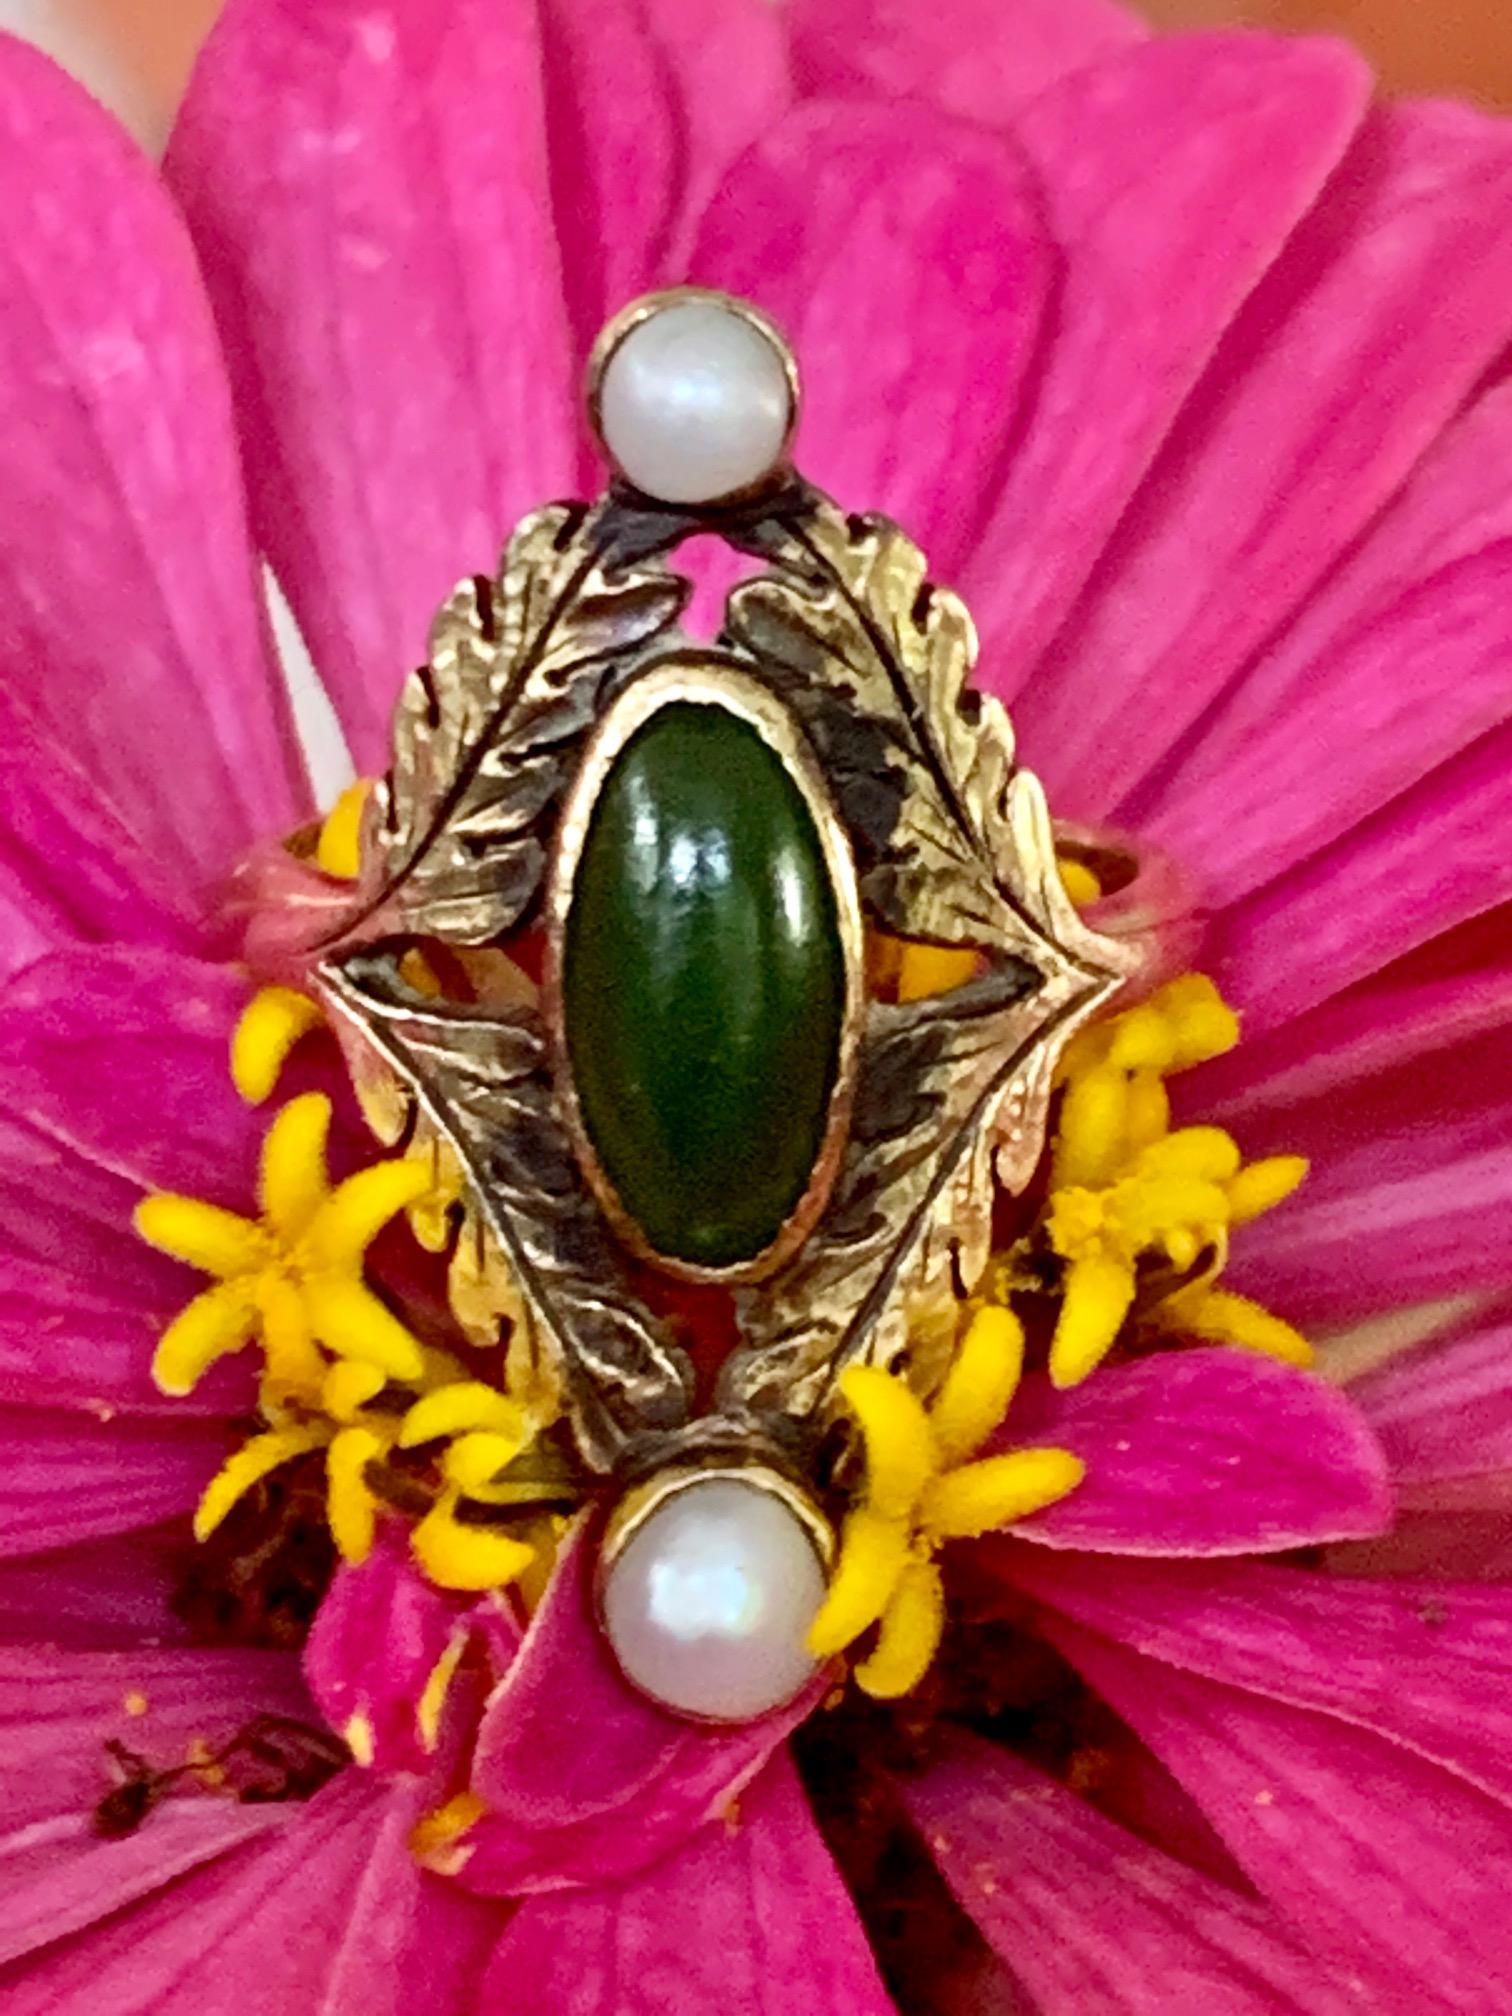 This beautiful antique ring features one green jade cabochon measuring 10mm x 5mm.  There are two pearls accepting the Jade stone.  They measure 3.5mm in size.

Size: 4 -  -This ring can be resized, but G. Lindberg Jewels does not provide sizing